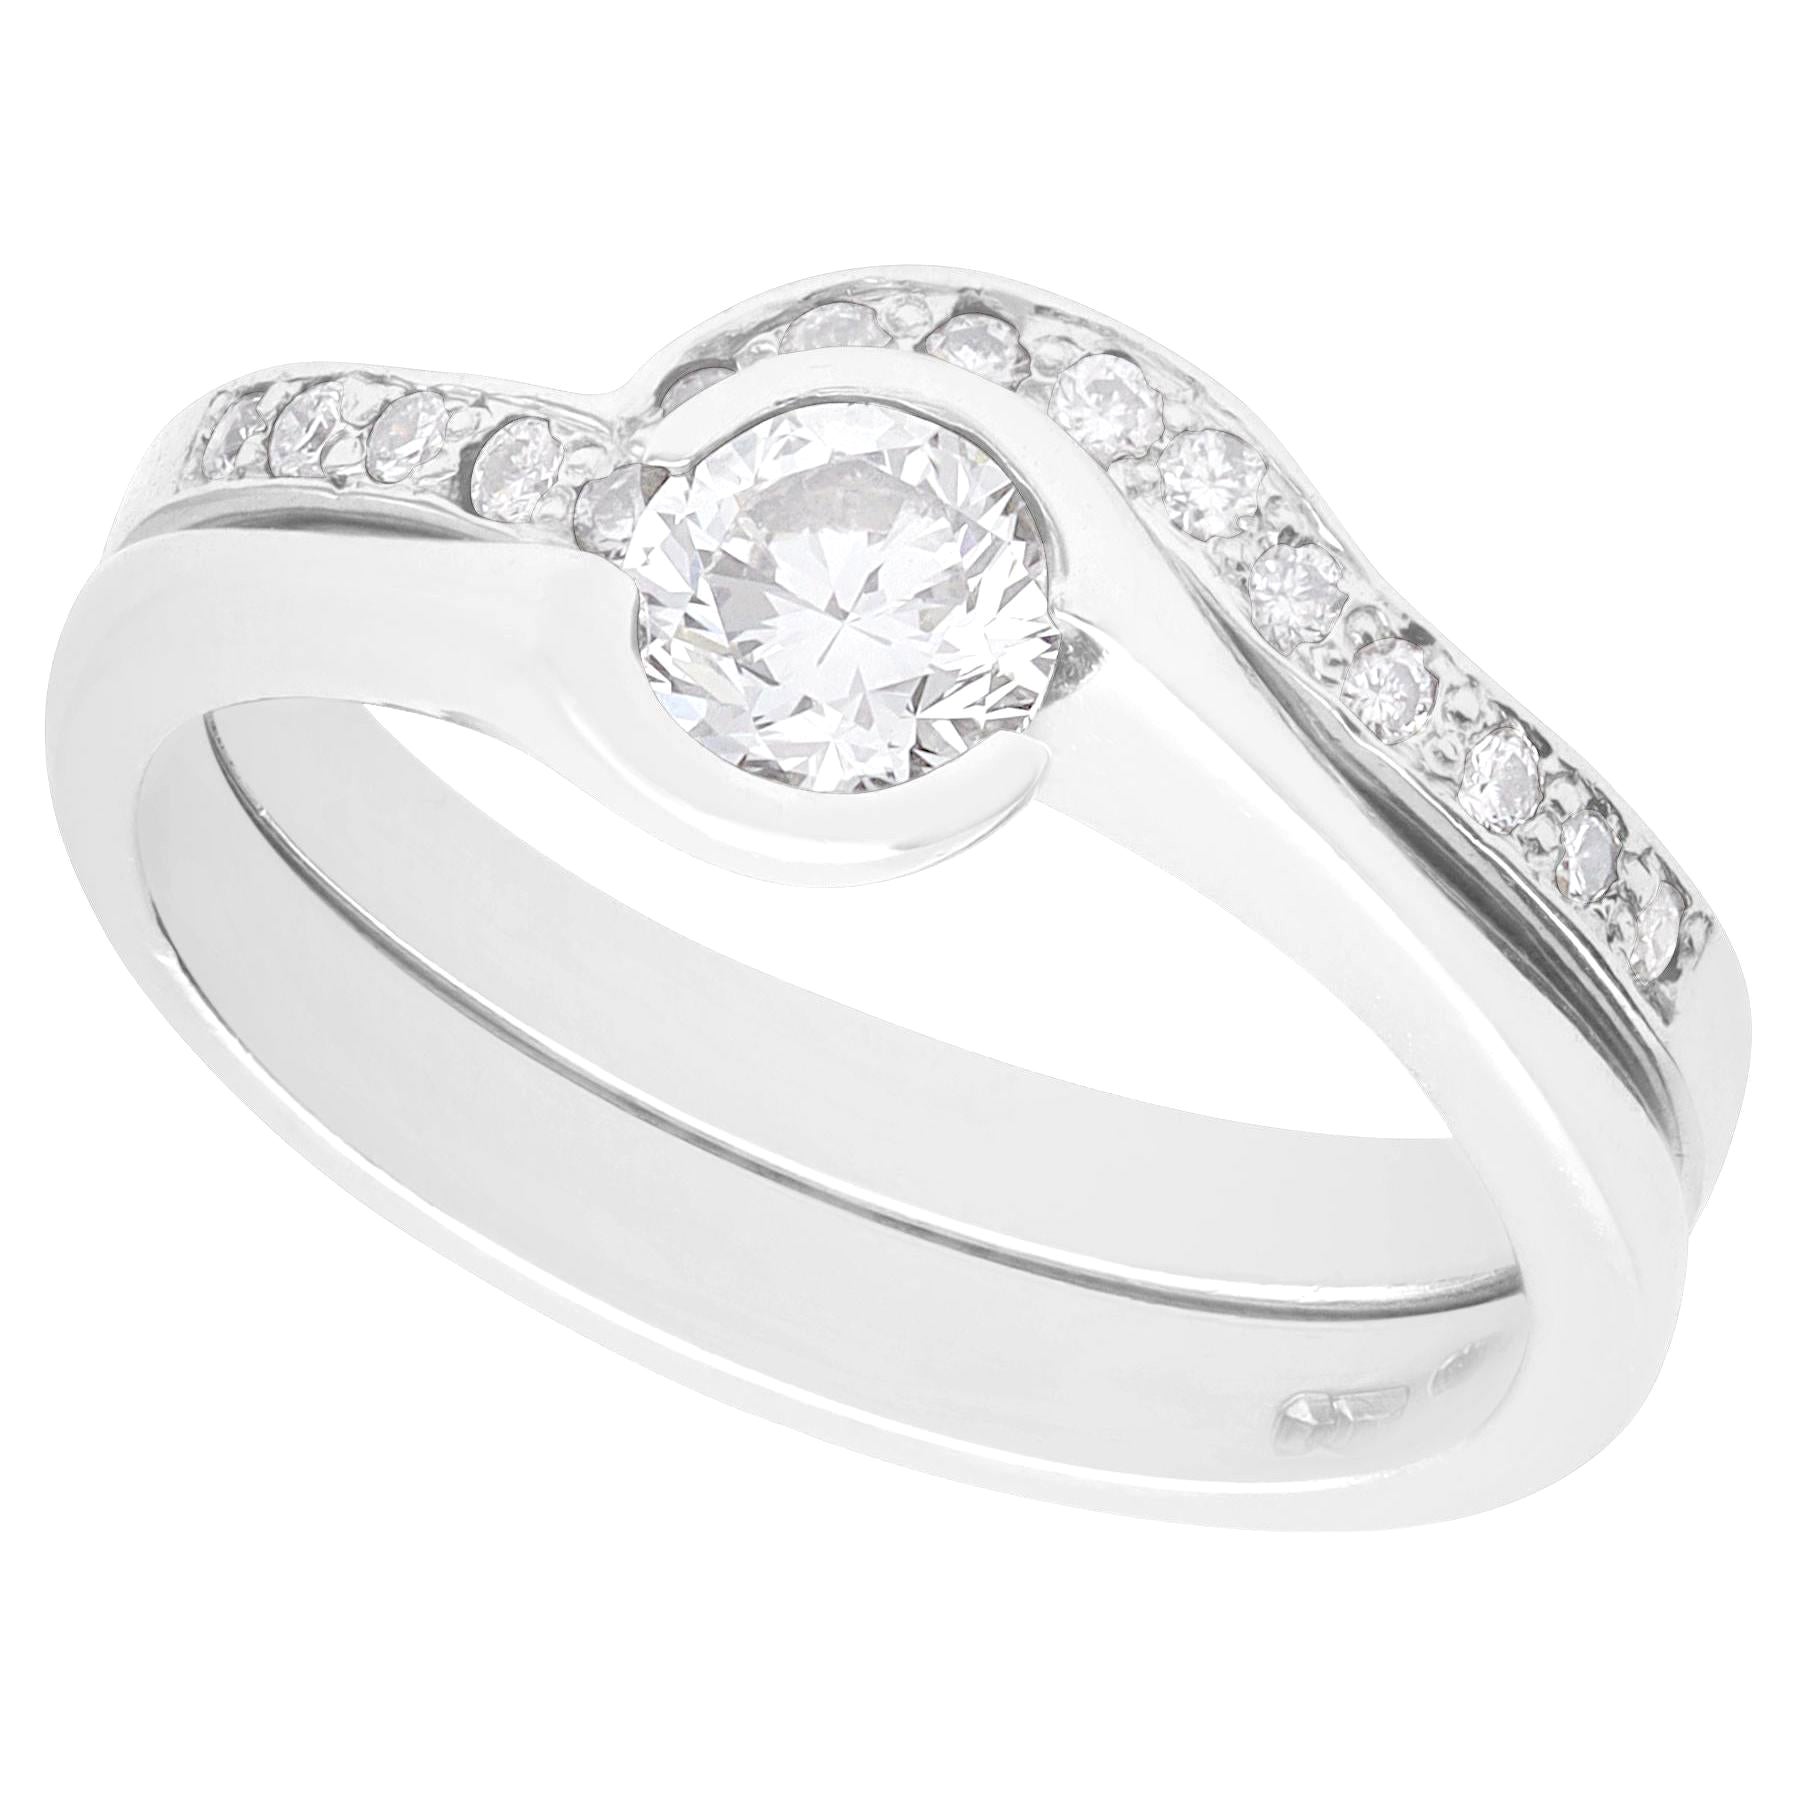 Contemporary GIA Certified 0.65 carat Diamond and Platinum Ring and Wedding Band For Sale